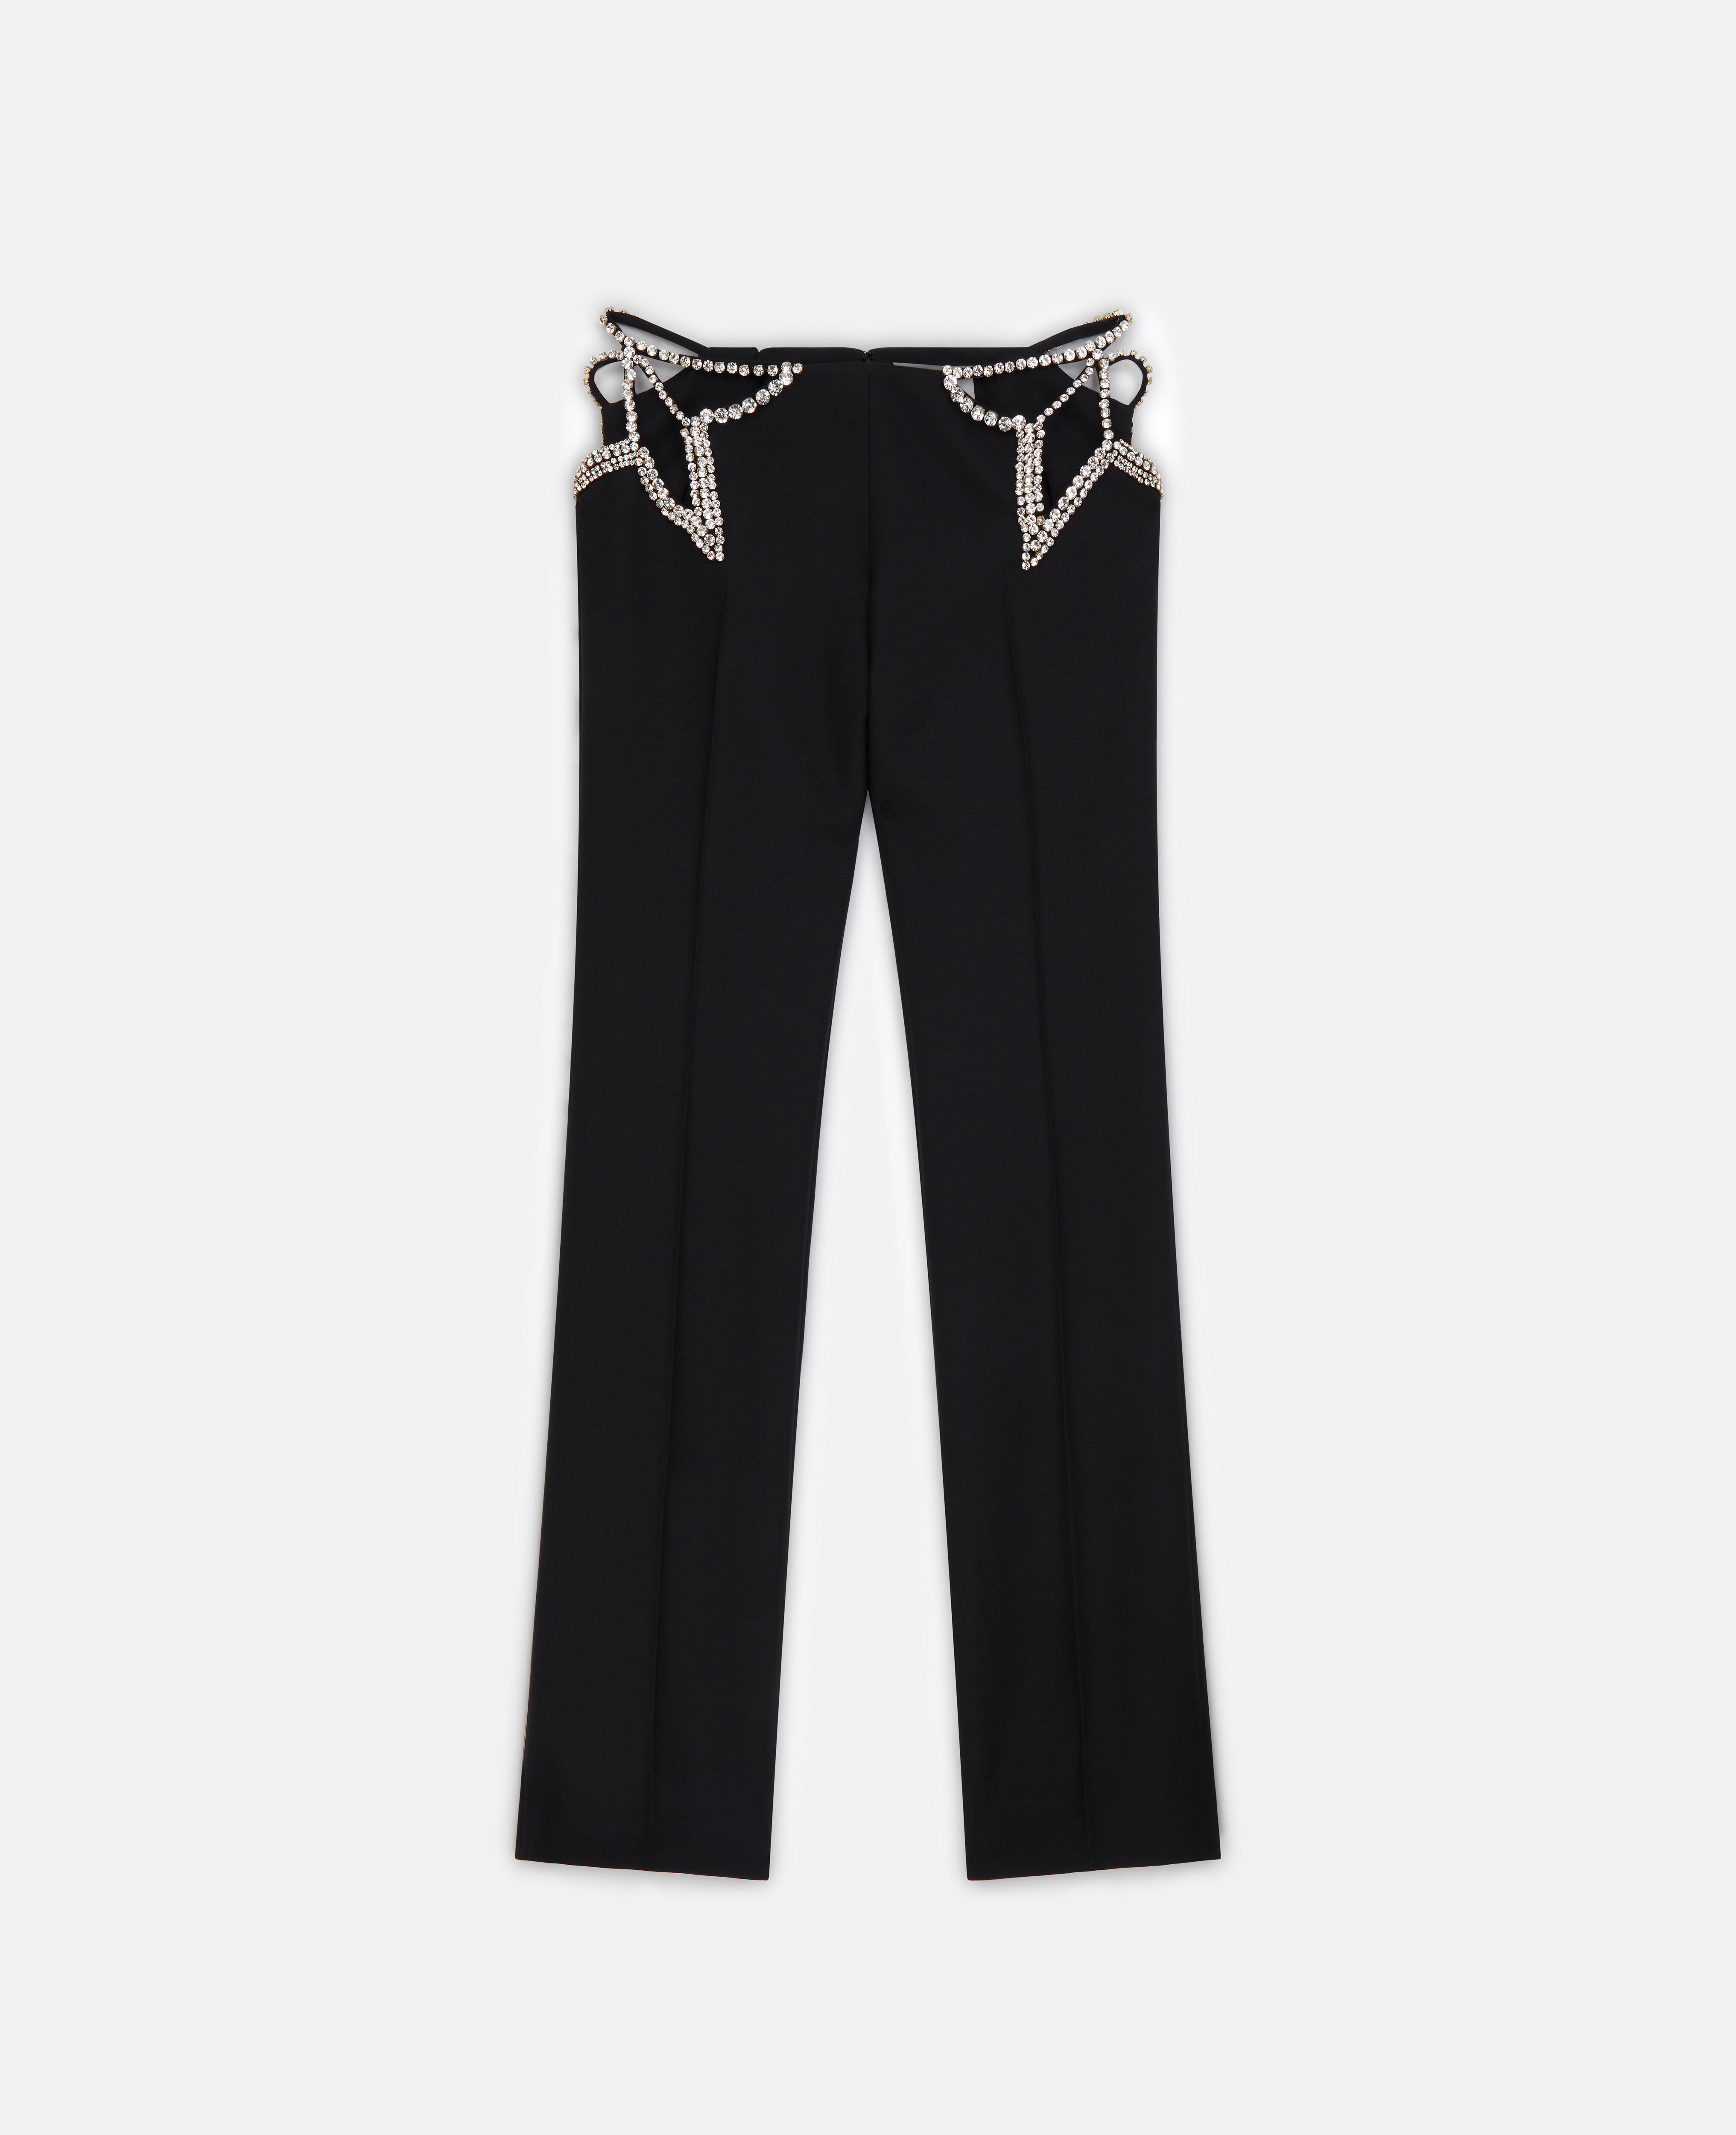 STELLA MCCARTNEY Cropped pleated wool-blend tapered pants | NET-A-PORTER